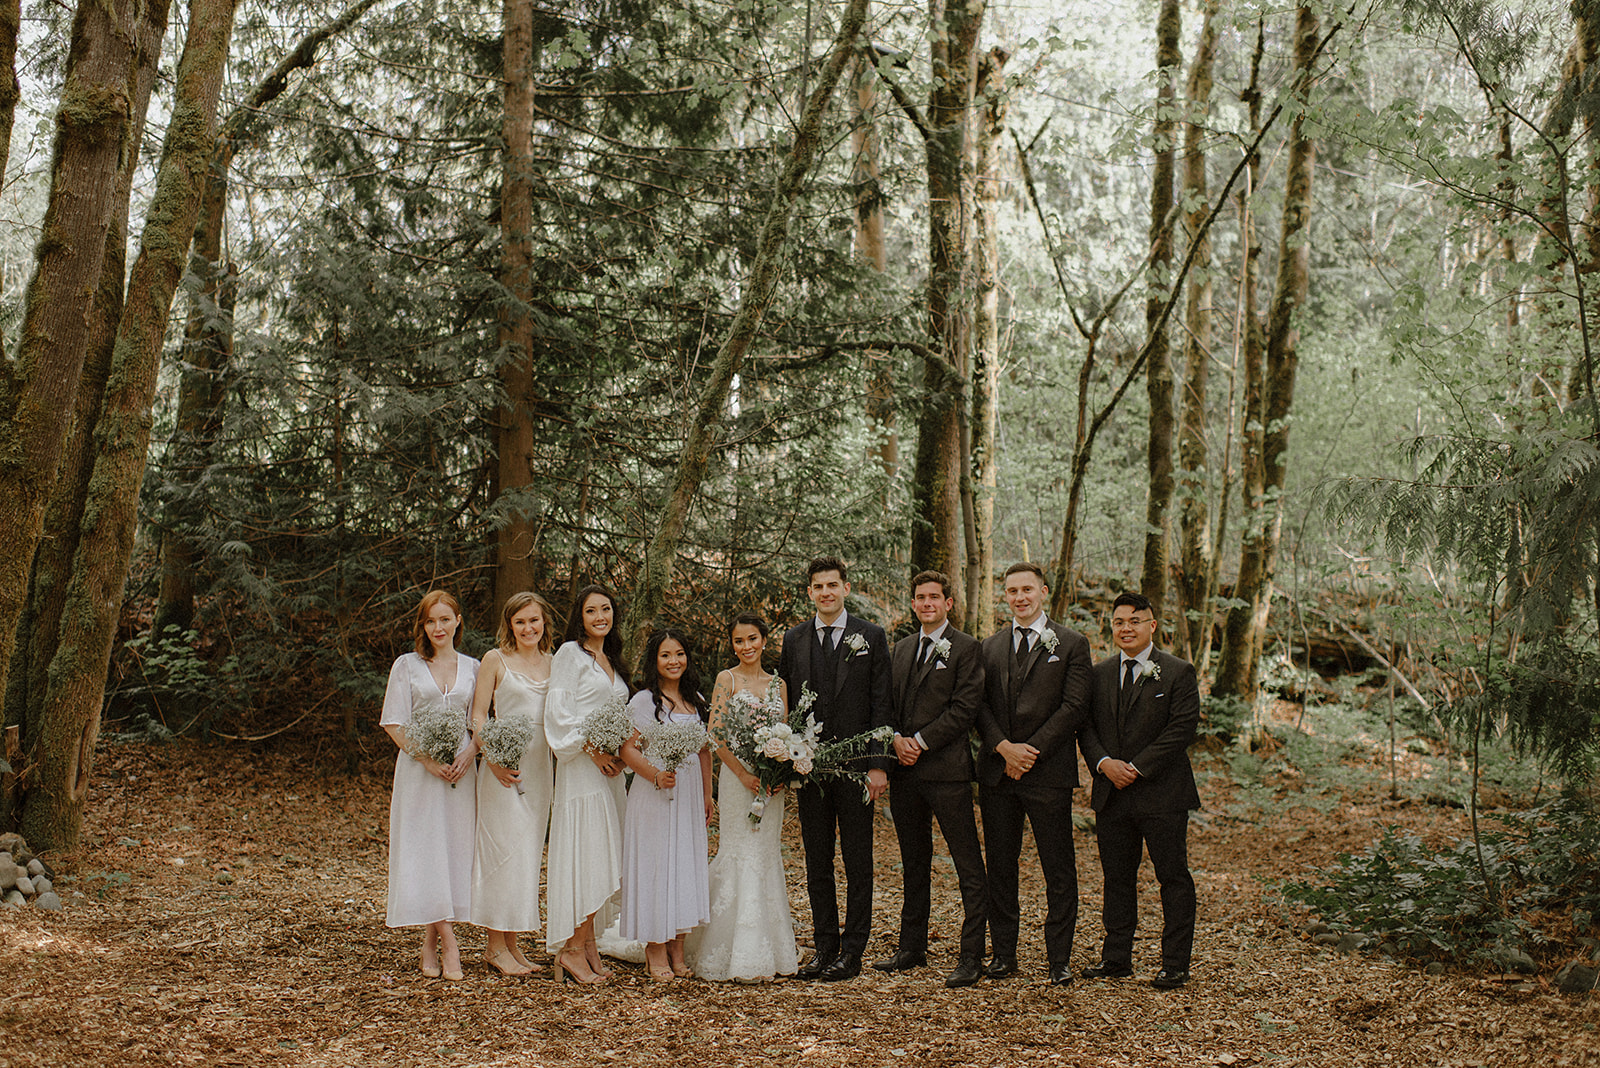 Vancouver Wedding Photographer captures wedding of couple in love at Sunwolf in Squamish